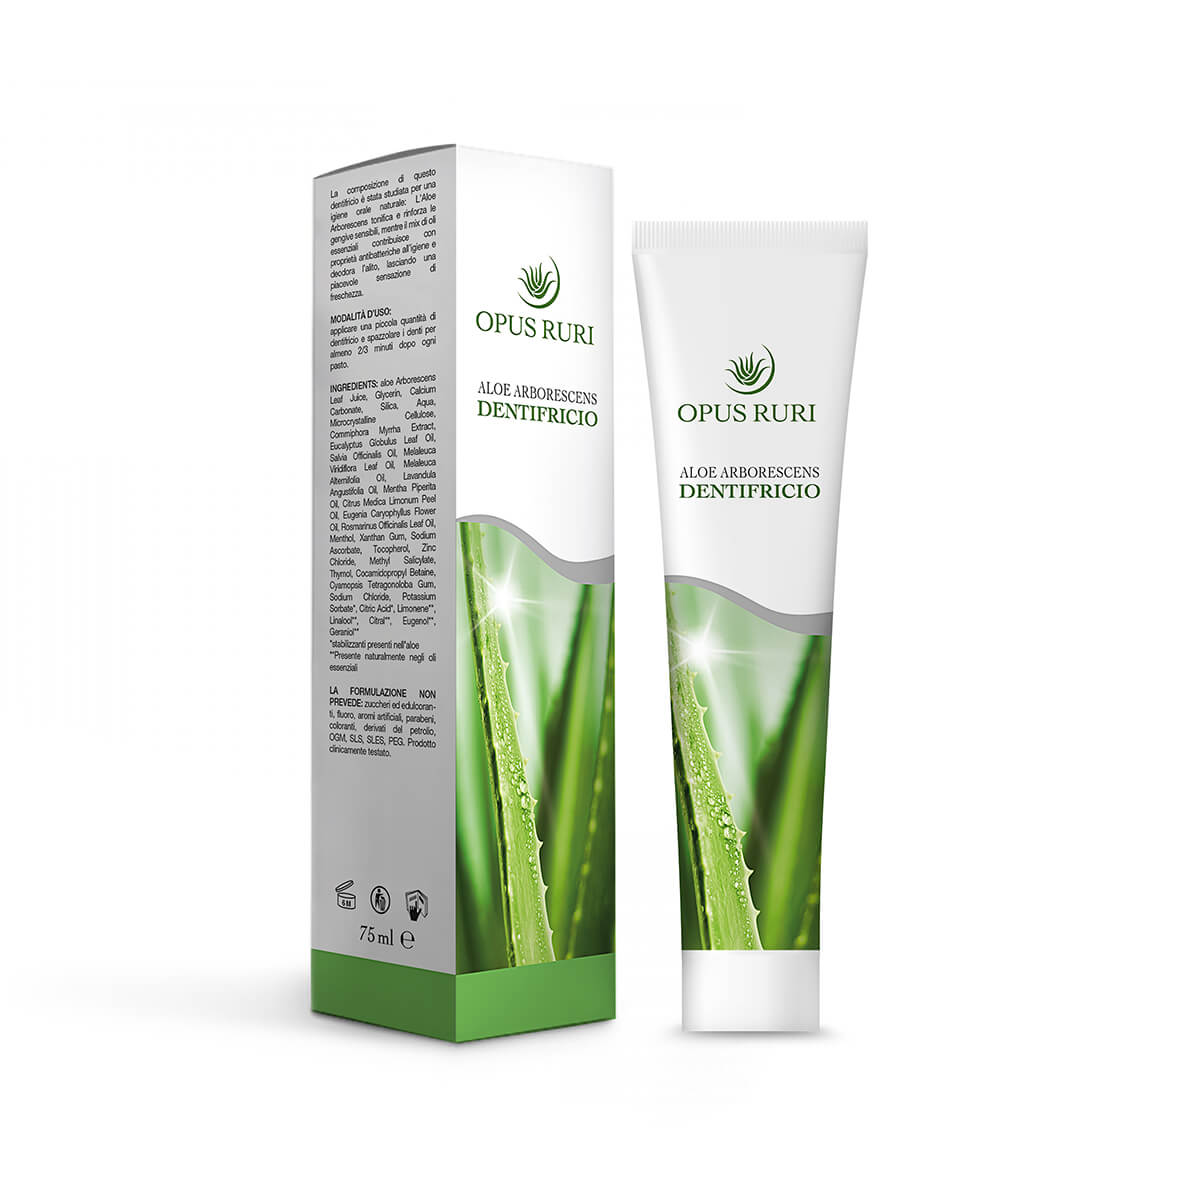 natural aloe arborescens toothpaste 75 ml without fluoride, protects against tooth decay and tartar